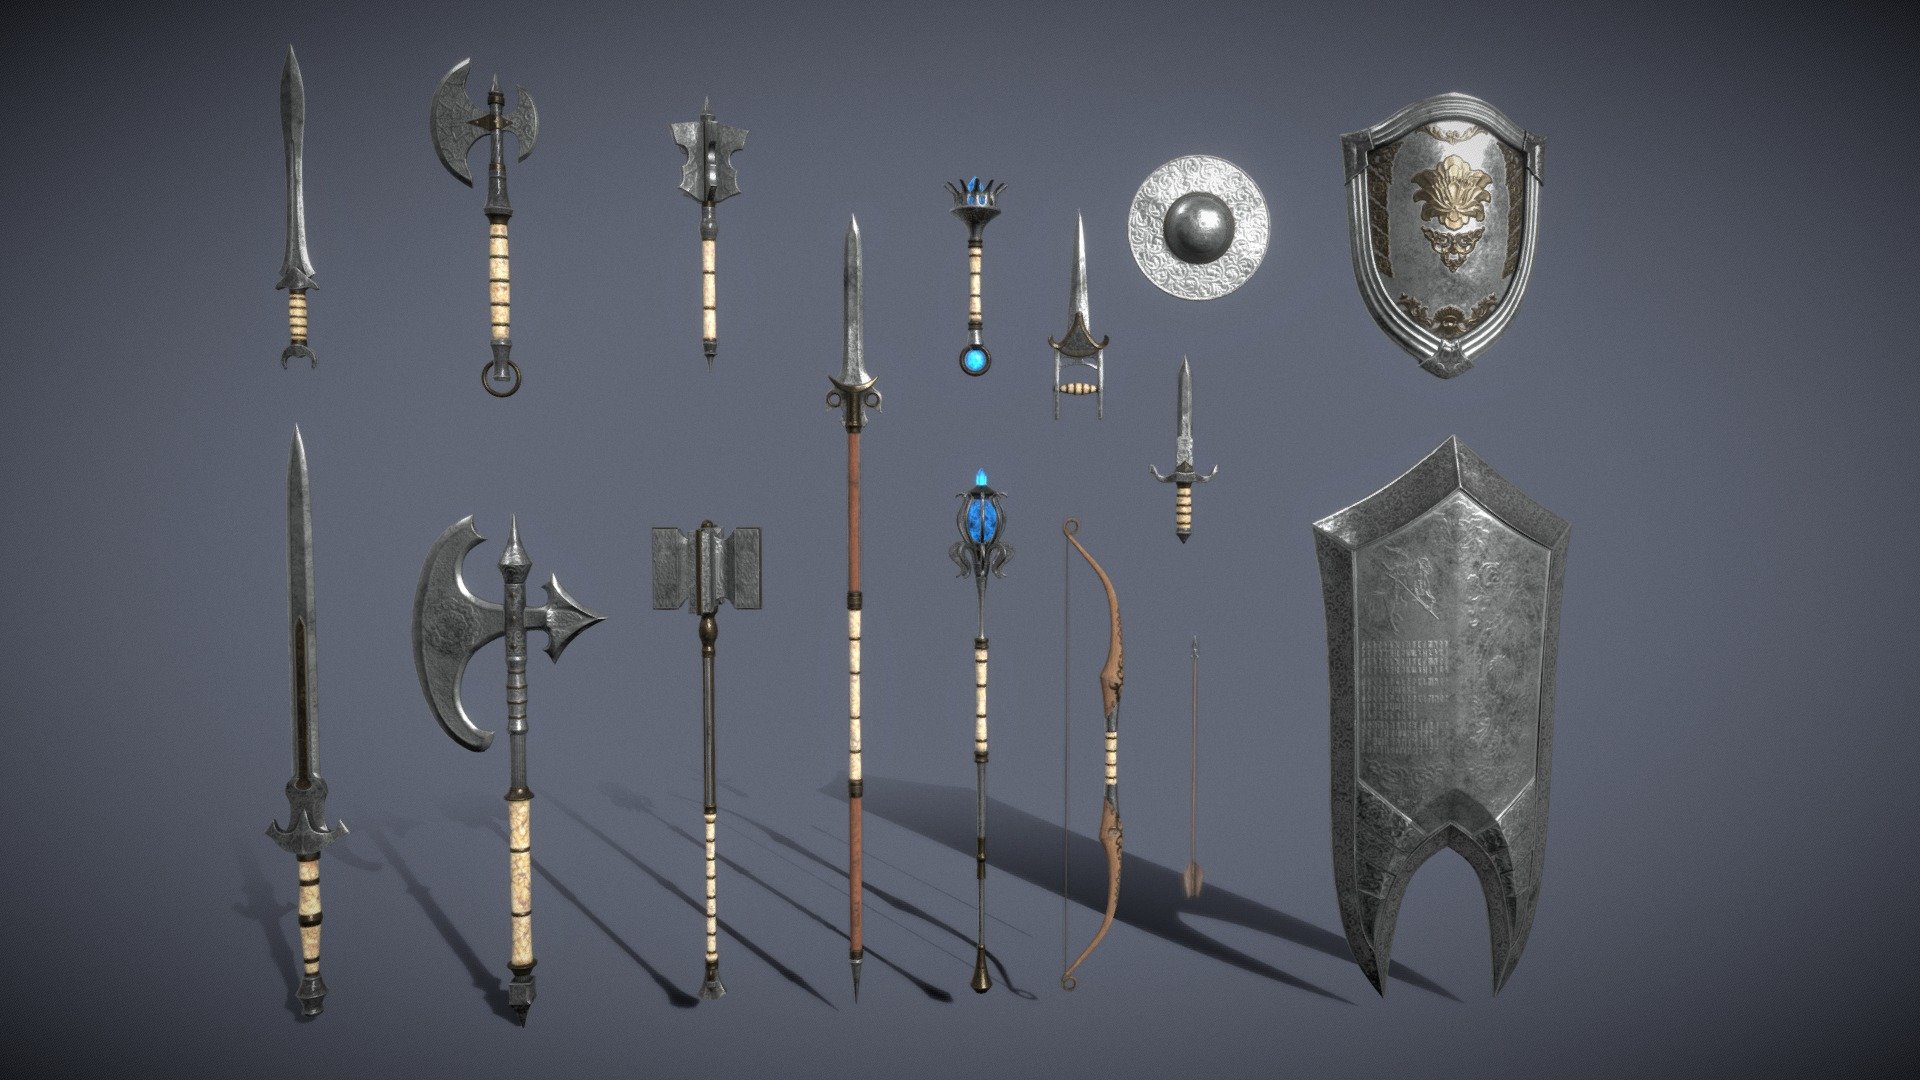 A set of fantasy Silver weapons.

The set consists of sixteen unique objects.

PBR textures have a resolution of 2048x2048.

Total polygons: 43218 triangles; 21853 vertices.

1) Sword (one-handed) - 1796 tris

2) Sword (two-handed) - 2180 tris

3) Mace (one-handed) - 1524 tris

4) Mace (two-handed) - 3420 tris

5) Ax (one-handed) - 2728 tris  

6) Ax (two-handed) - 2720 tris

7) Lance - 2452 tris

8) Dagger - 1312 tris

9) Brass knuckles - 2460 tris

10) Bow - 1844 tris

11) Staff - 8254 tris

12) Scepter - 5178 tris

13) Shield (small) - 1776 tris

14) Shield (medium) - 3500 tris

15) Shield (great) - 1706 tris

16) Arrow - 368 tris

Archives with textures contain:

Texturing Unity (Metallic Smoothness) - AlbedoTransparency, MetallicSmoothness, Normal, Emission

Texturing Unreal Engine - BaseColor, Normal, OcclusionRoughnessMetallic, Emissive - Silver Fantasy Weapon Set - 3D model by zilbeerman 3d model